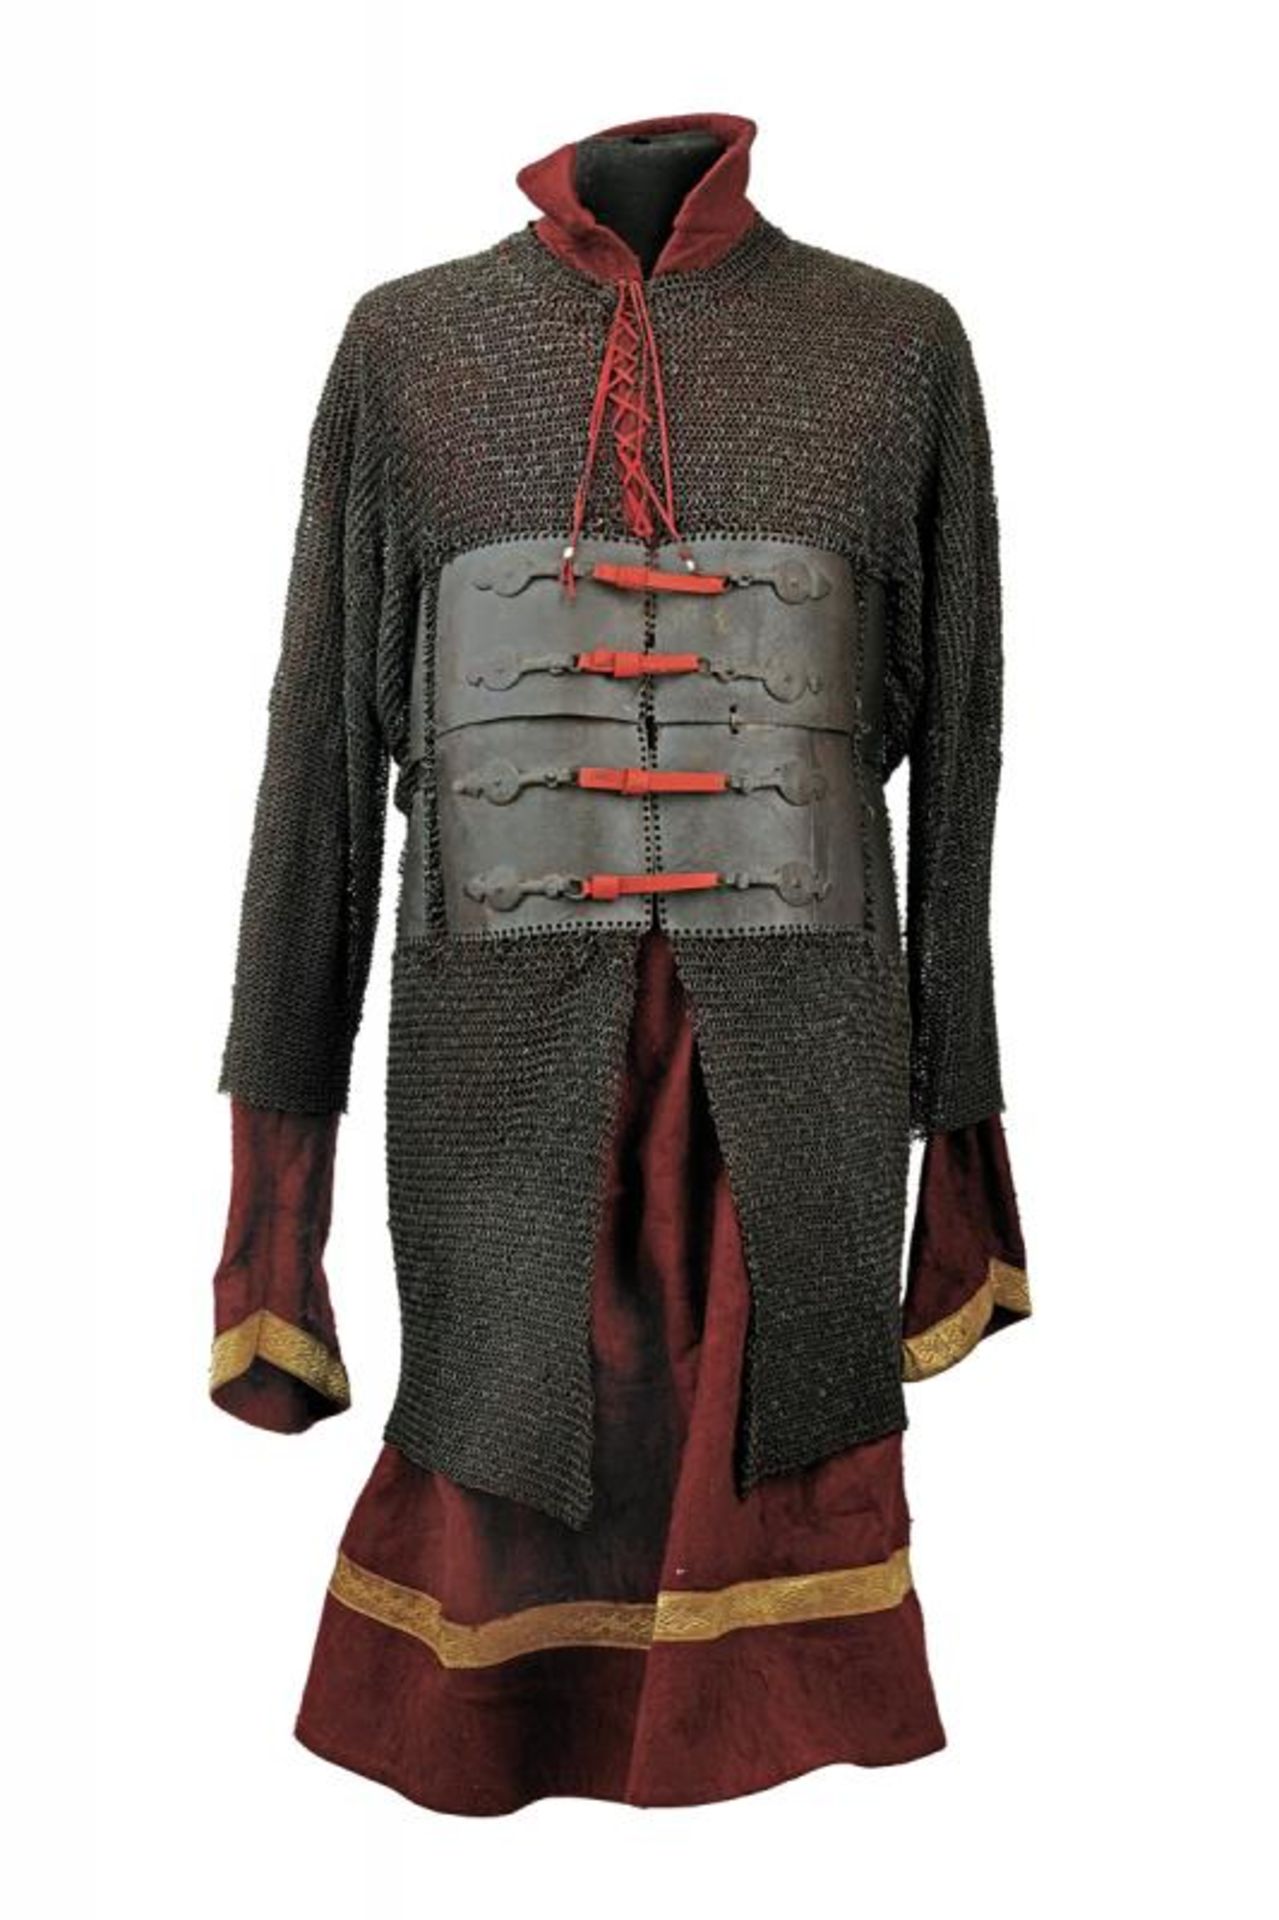 A chain mail combat armour